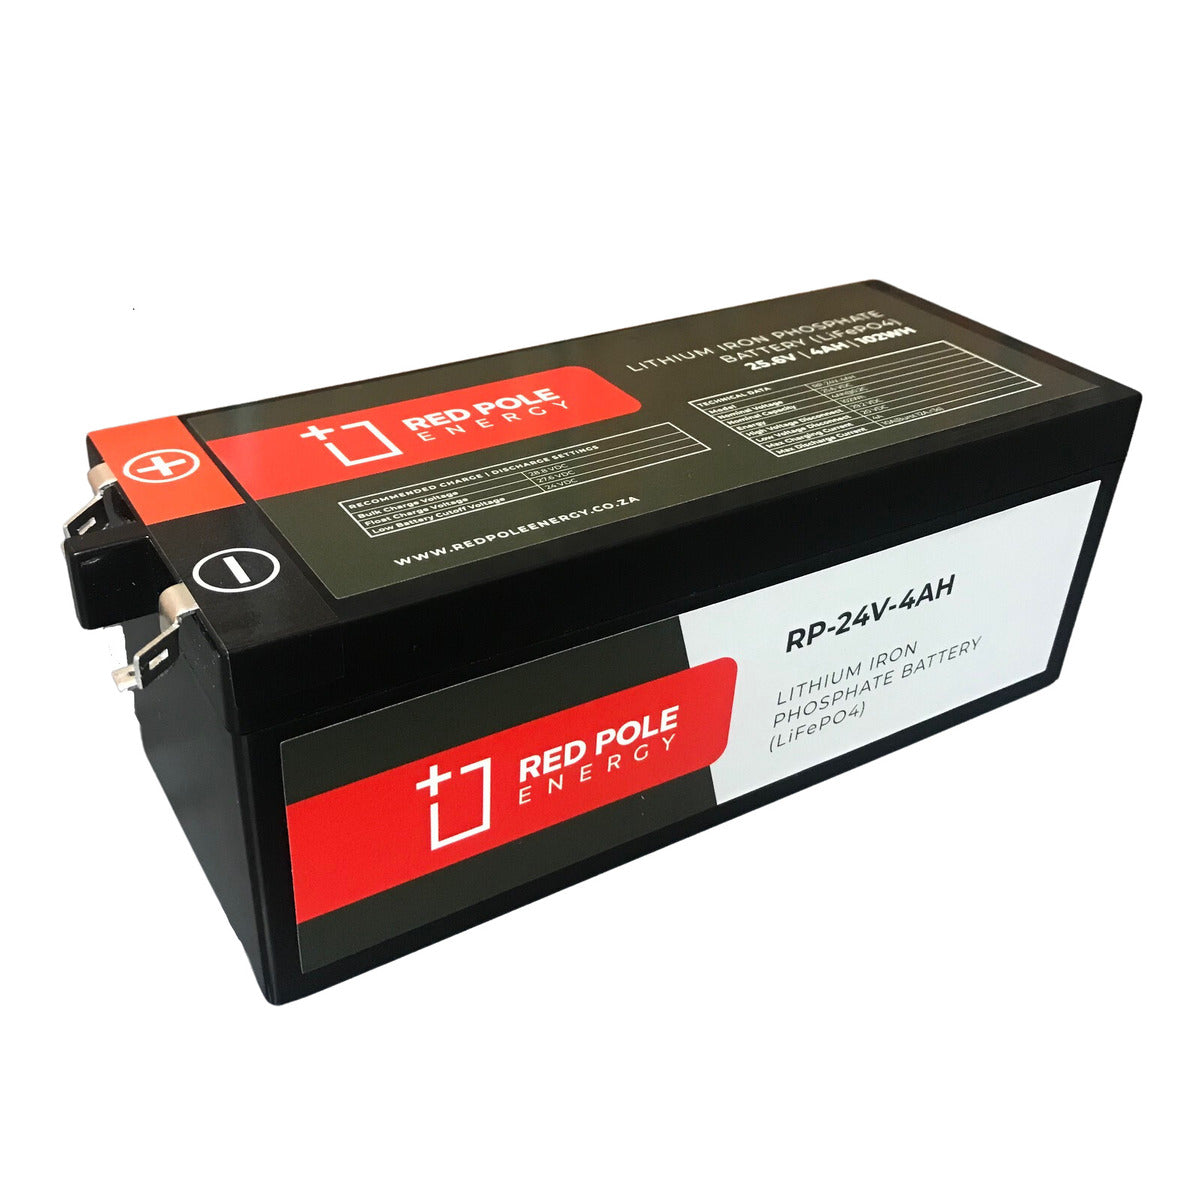 Red Pole Energy 24V 4Ah 102Wh LiFePO4 Battery